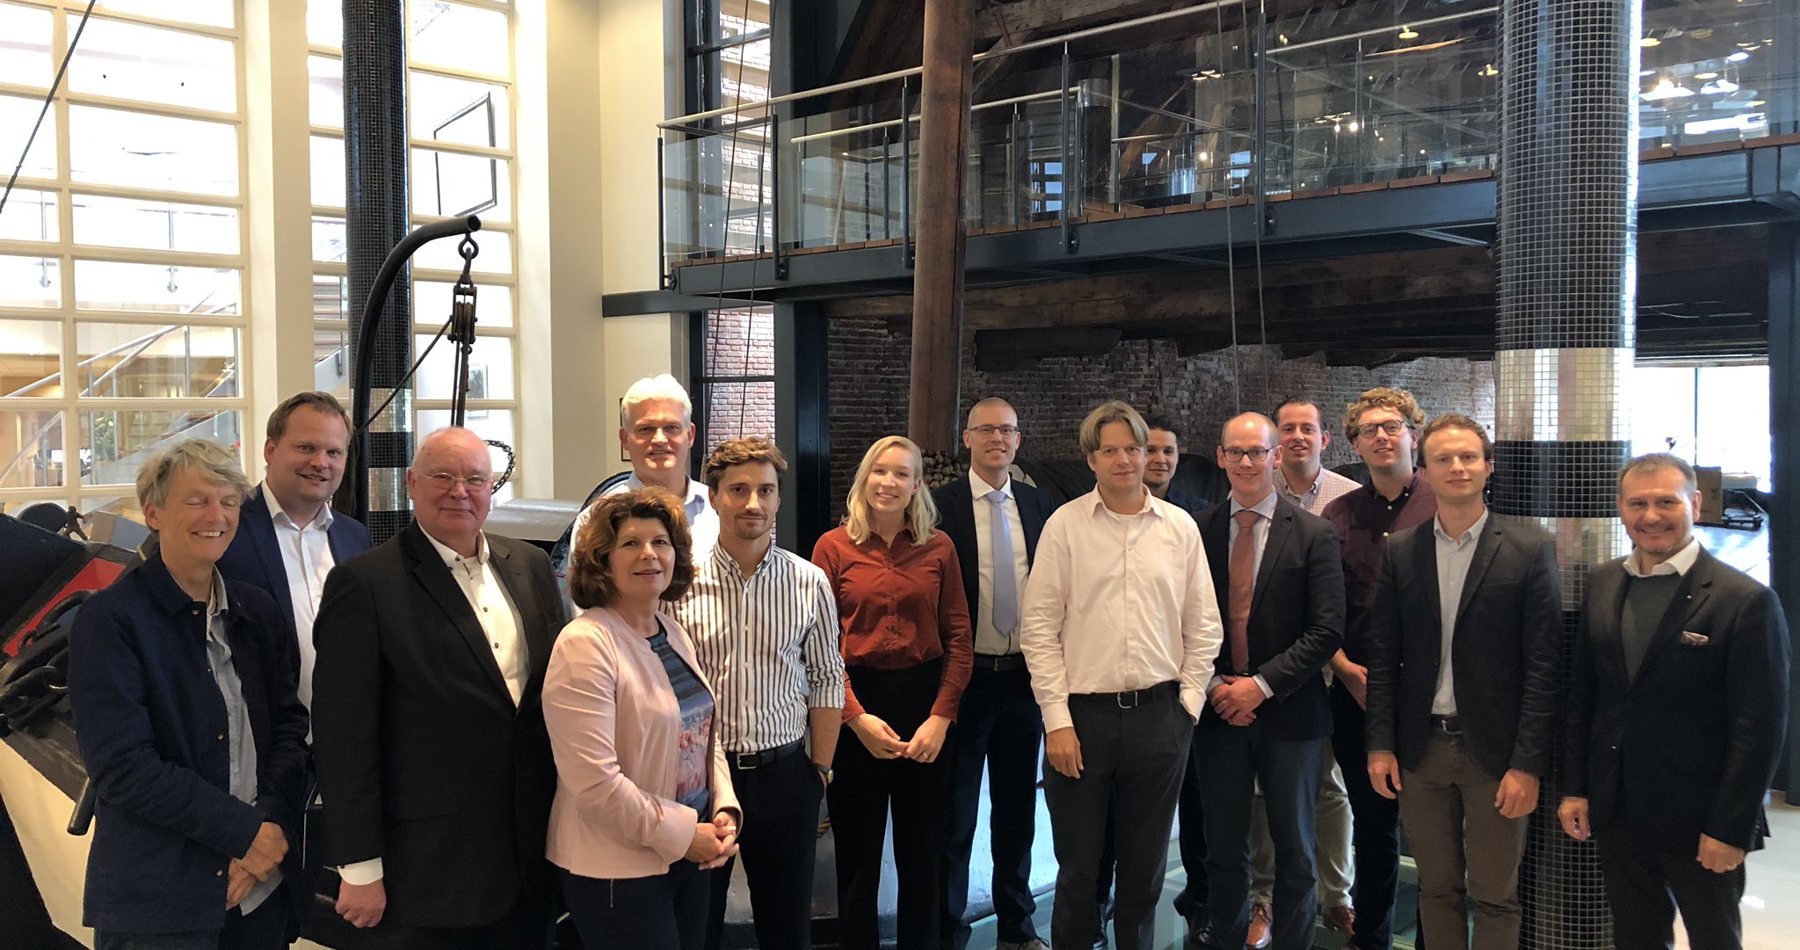 Royal Association of Netherlands Shipowners visits Wagenborg during Sustainable tour